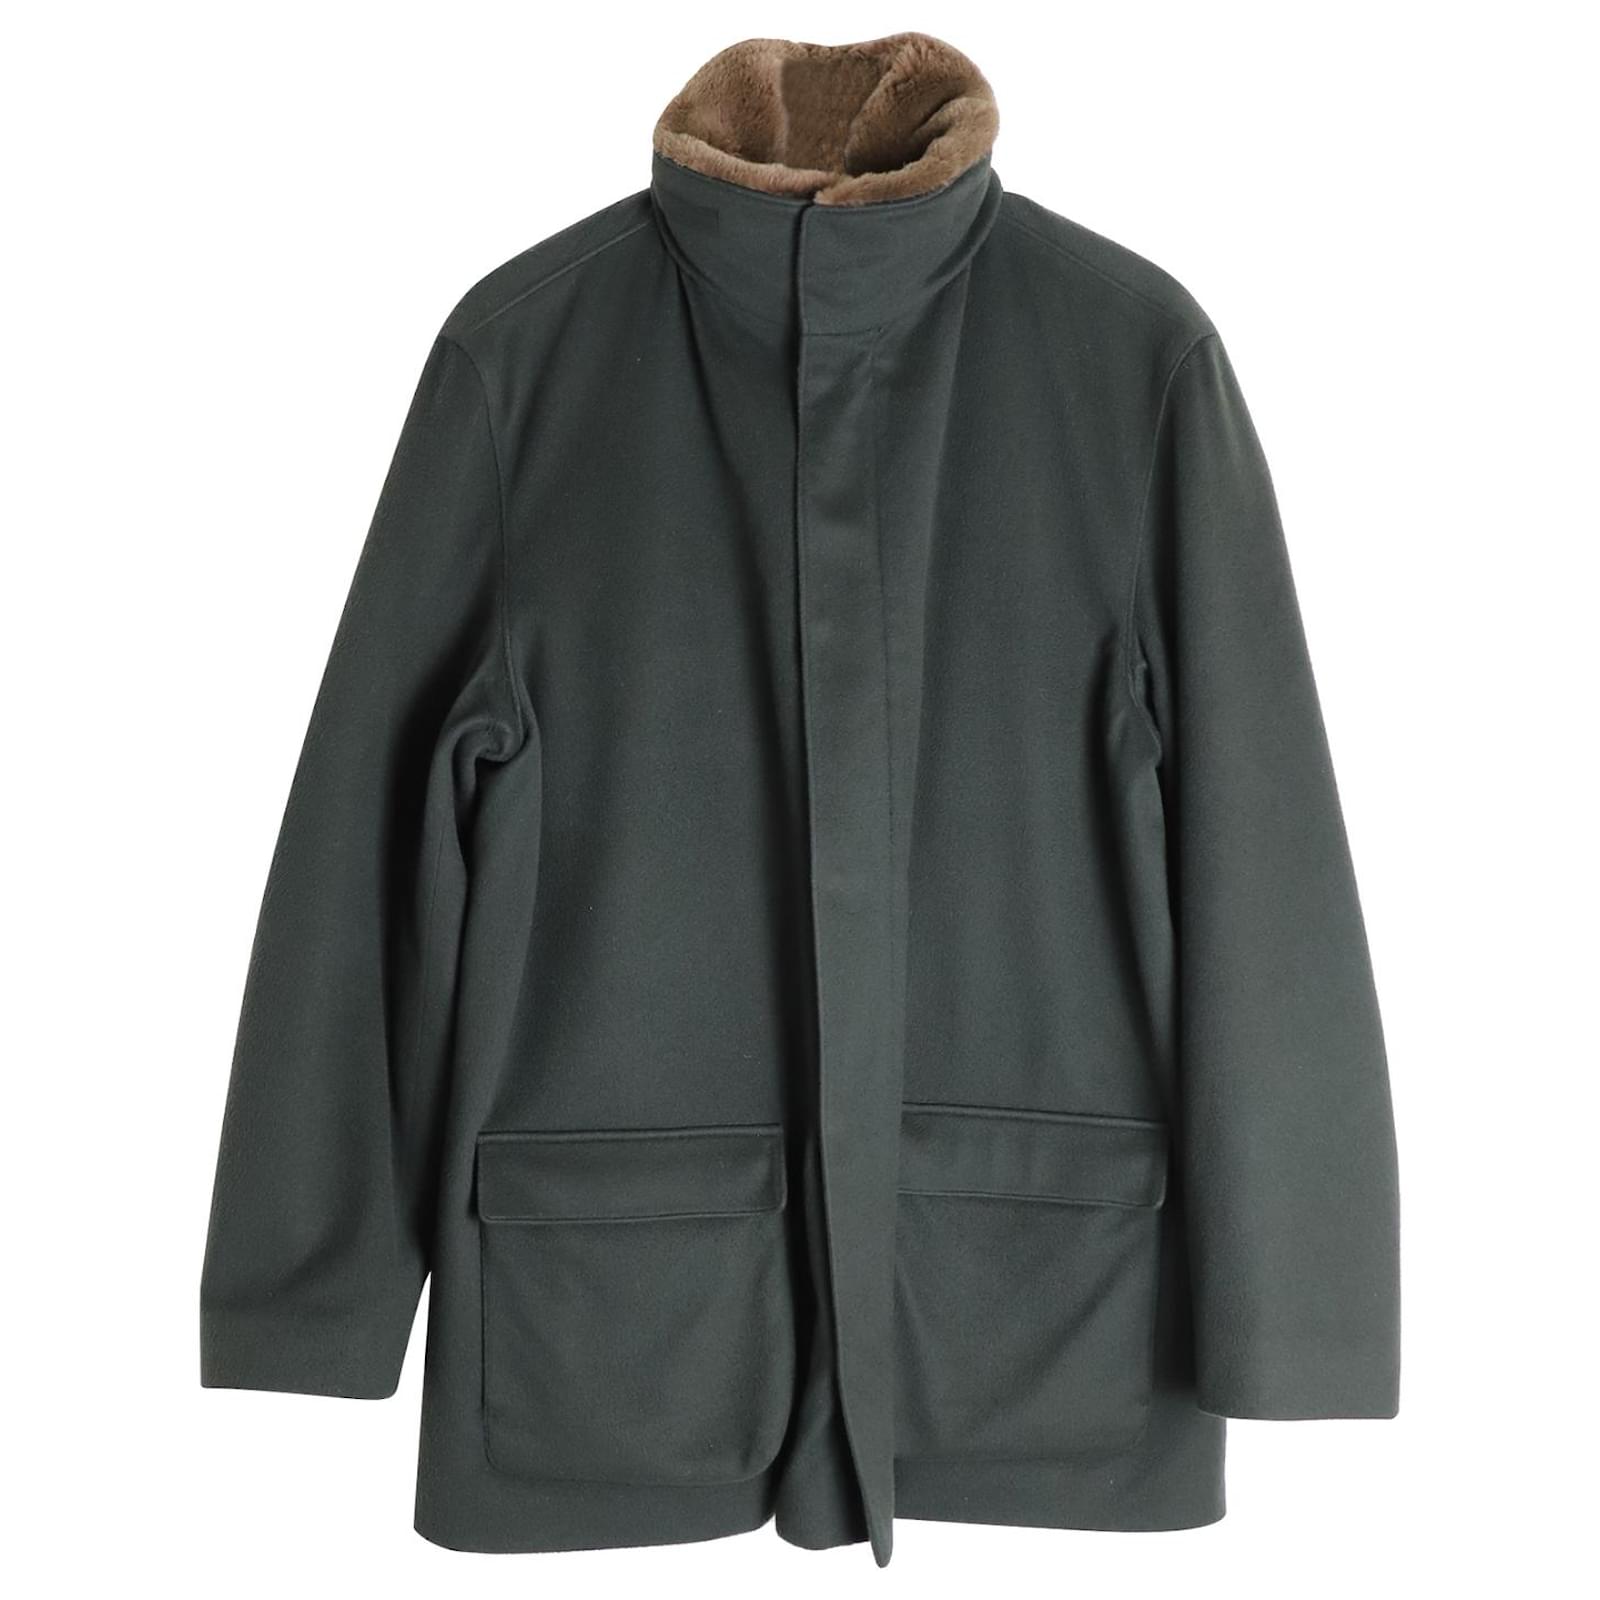 Loro Piana Winter Voyager Vicuña Storm System Jacket in Olive Green ...